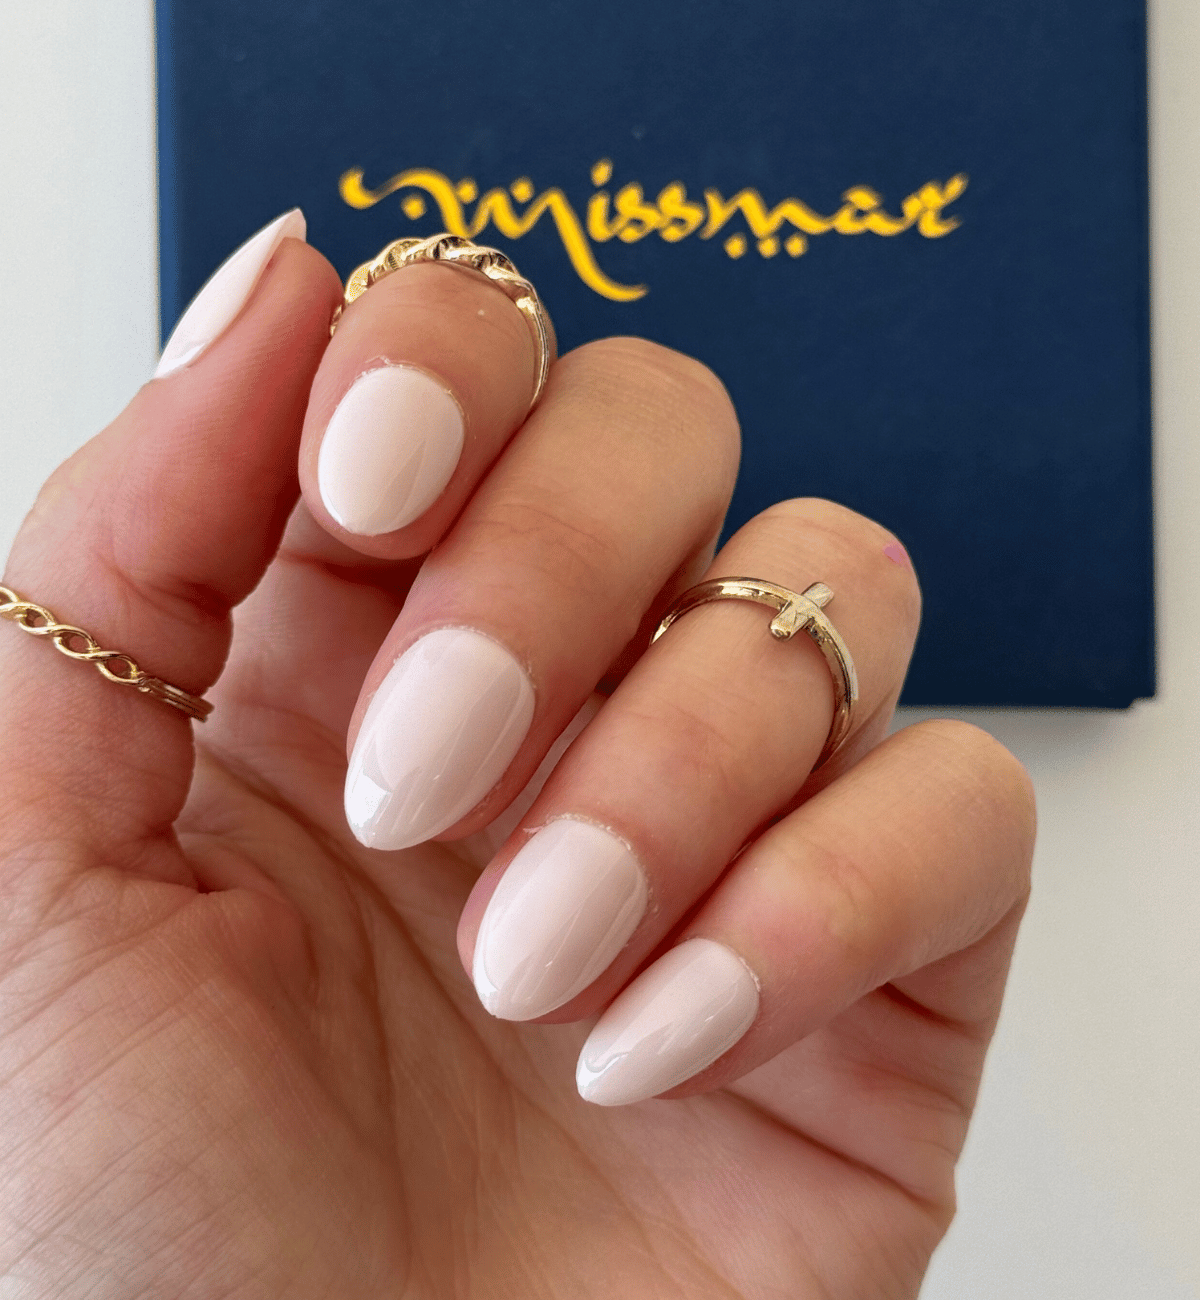 FAUX ONGLES CREAMY AMANDE COURT